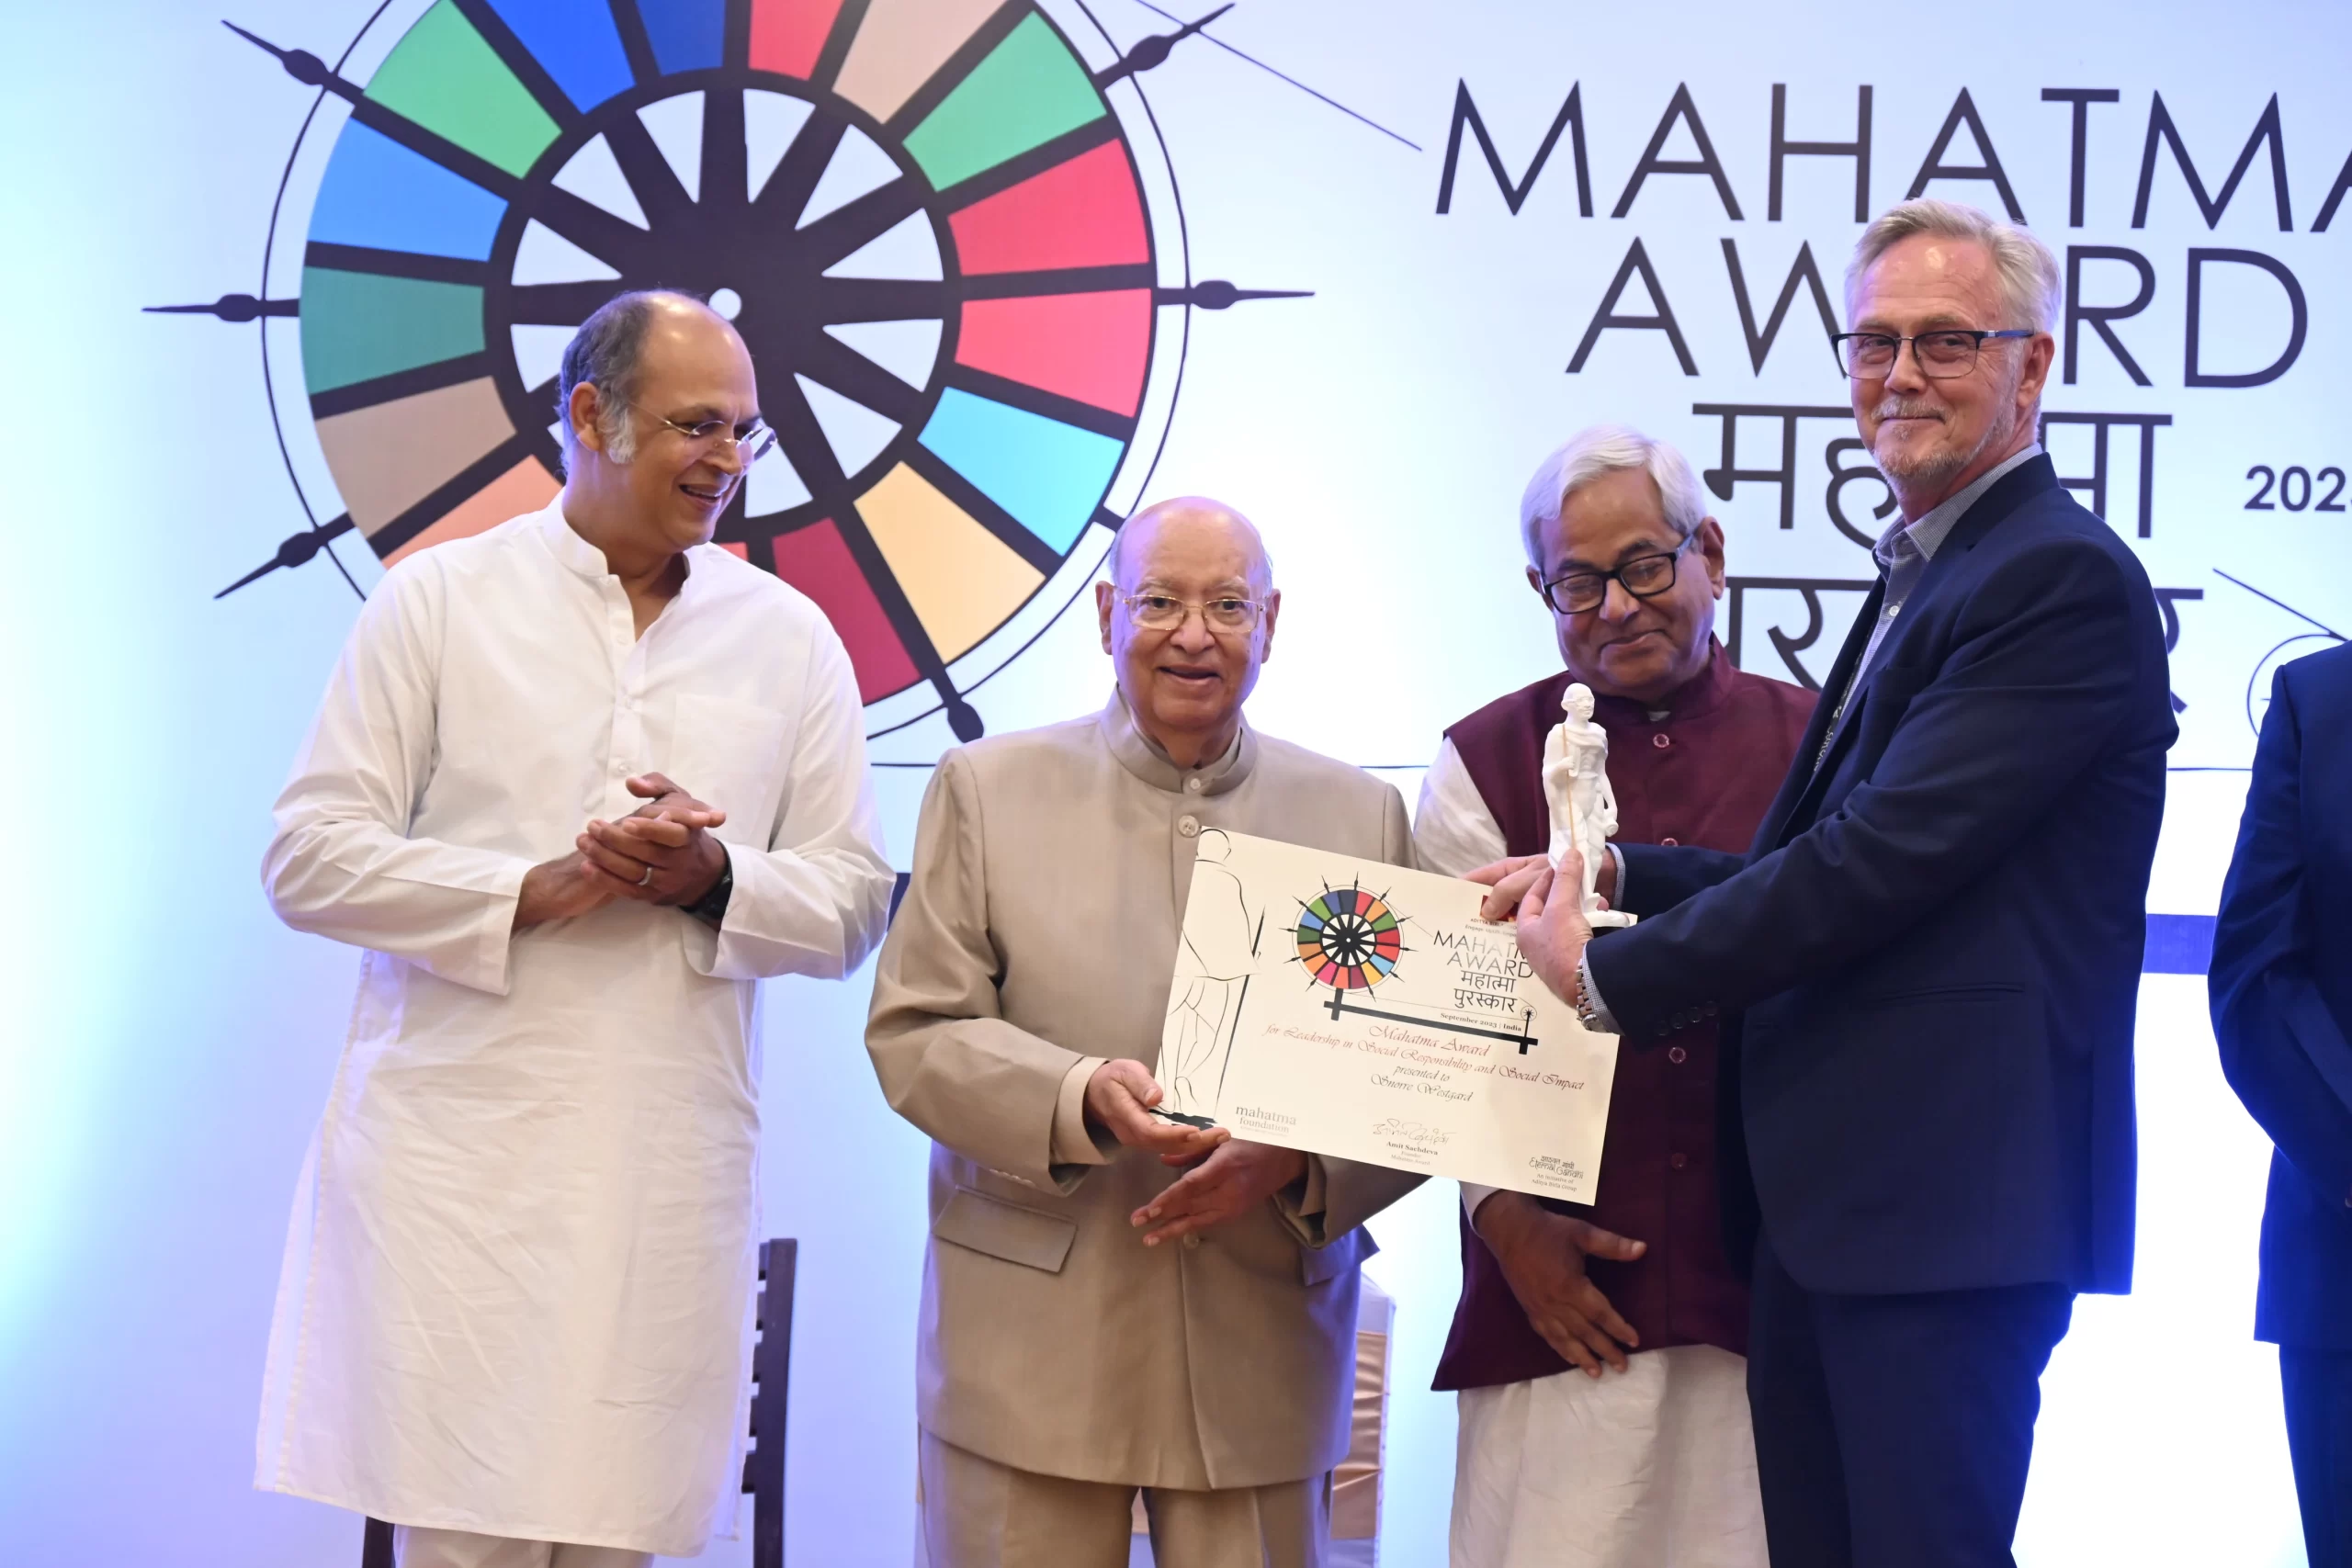 Mahatma Award for Leadership in Social Responsibility and Social Impact for HPPI’s CEO